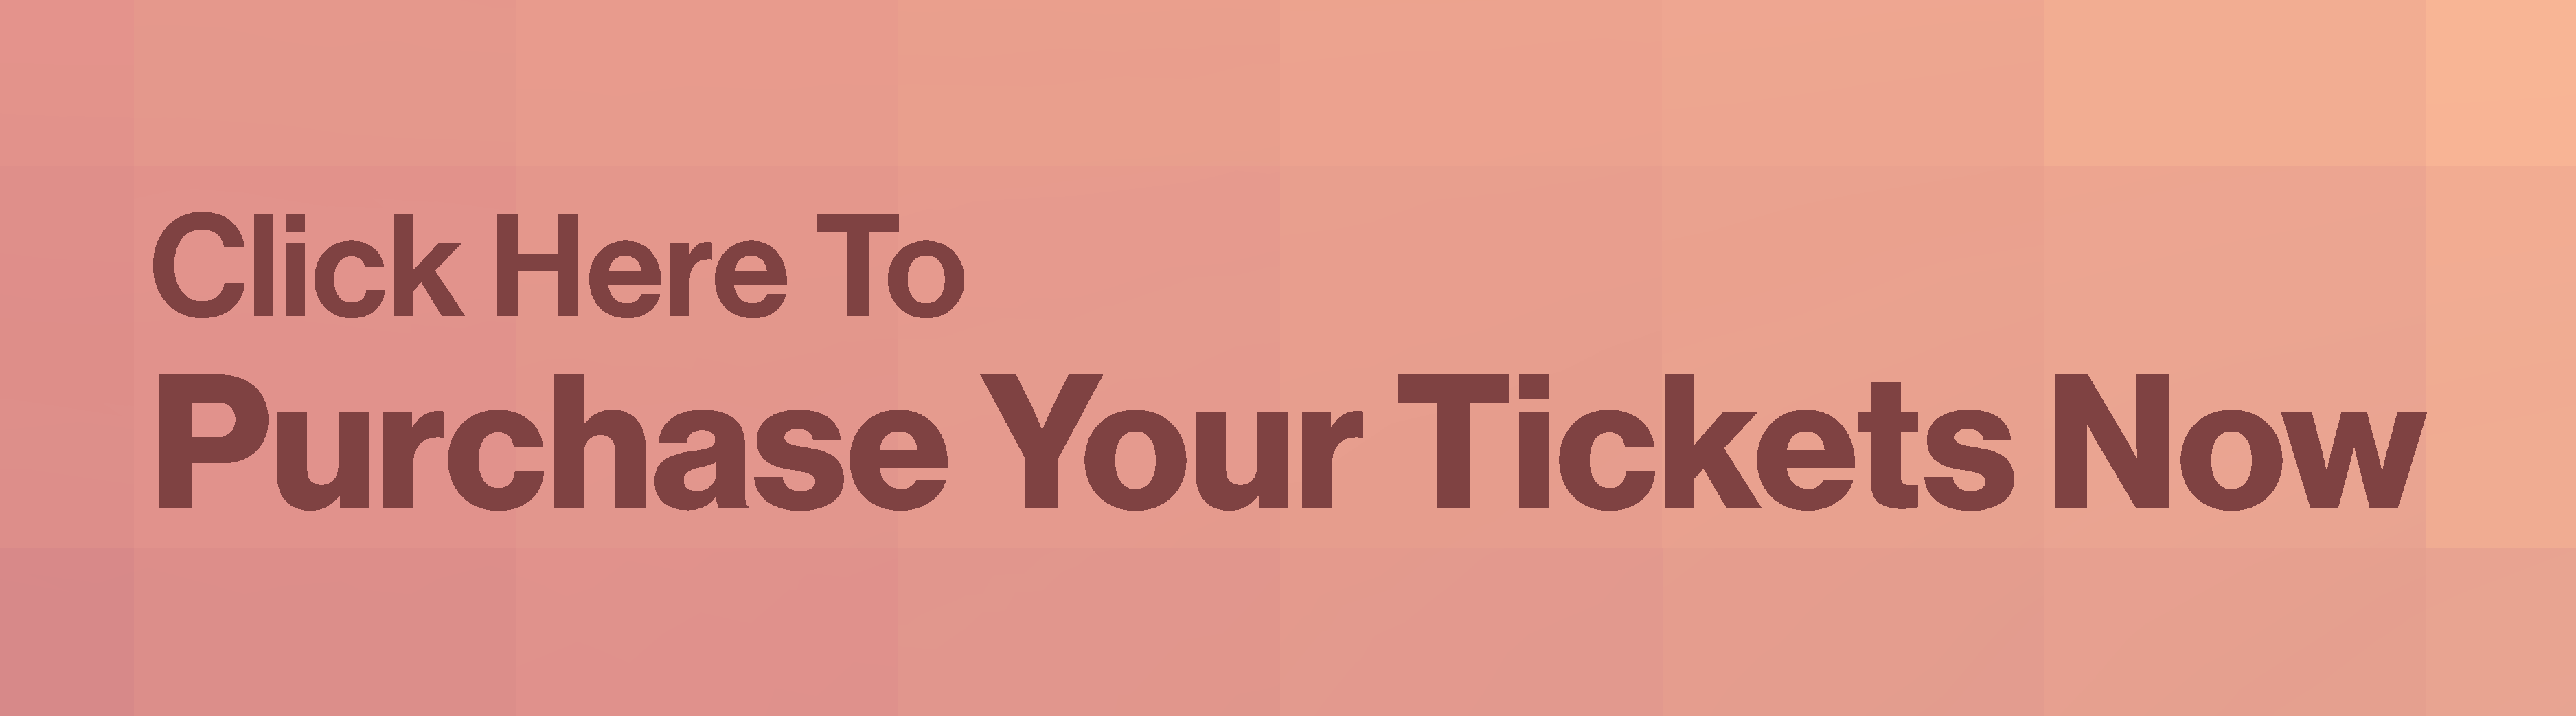 benefit_ticket_button.png